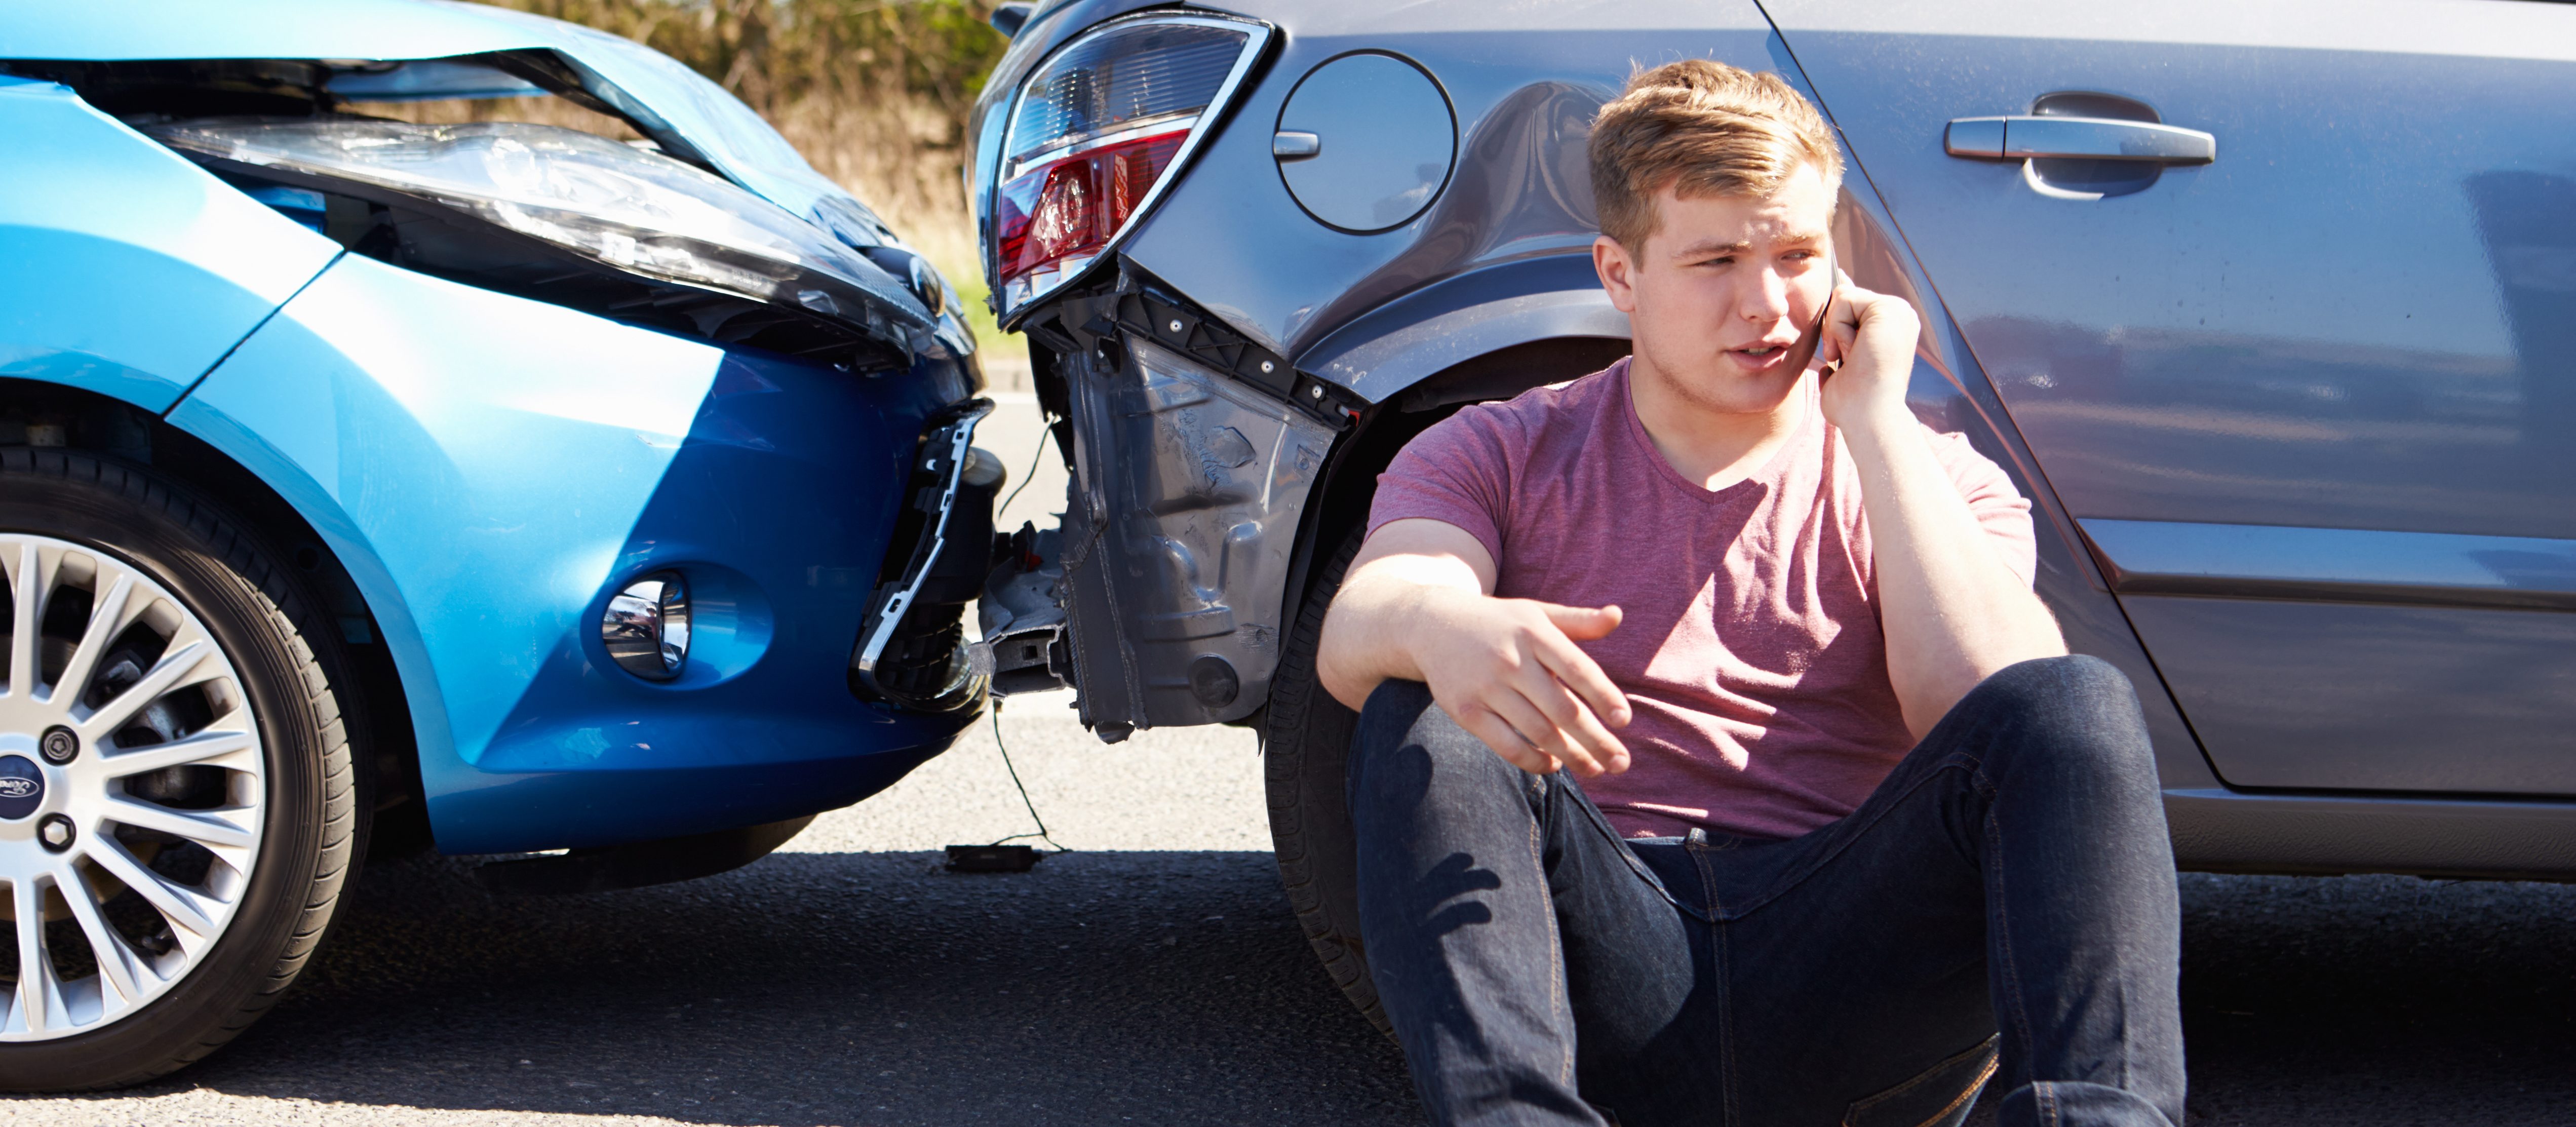 An unexpected car accident is just one of the reasons you need an emergency fund.